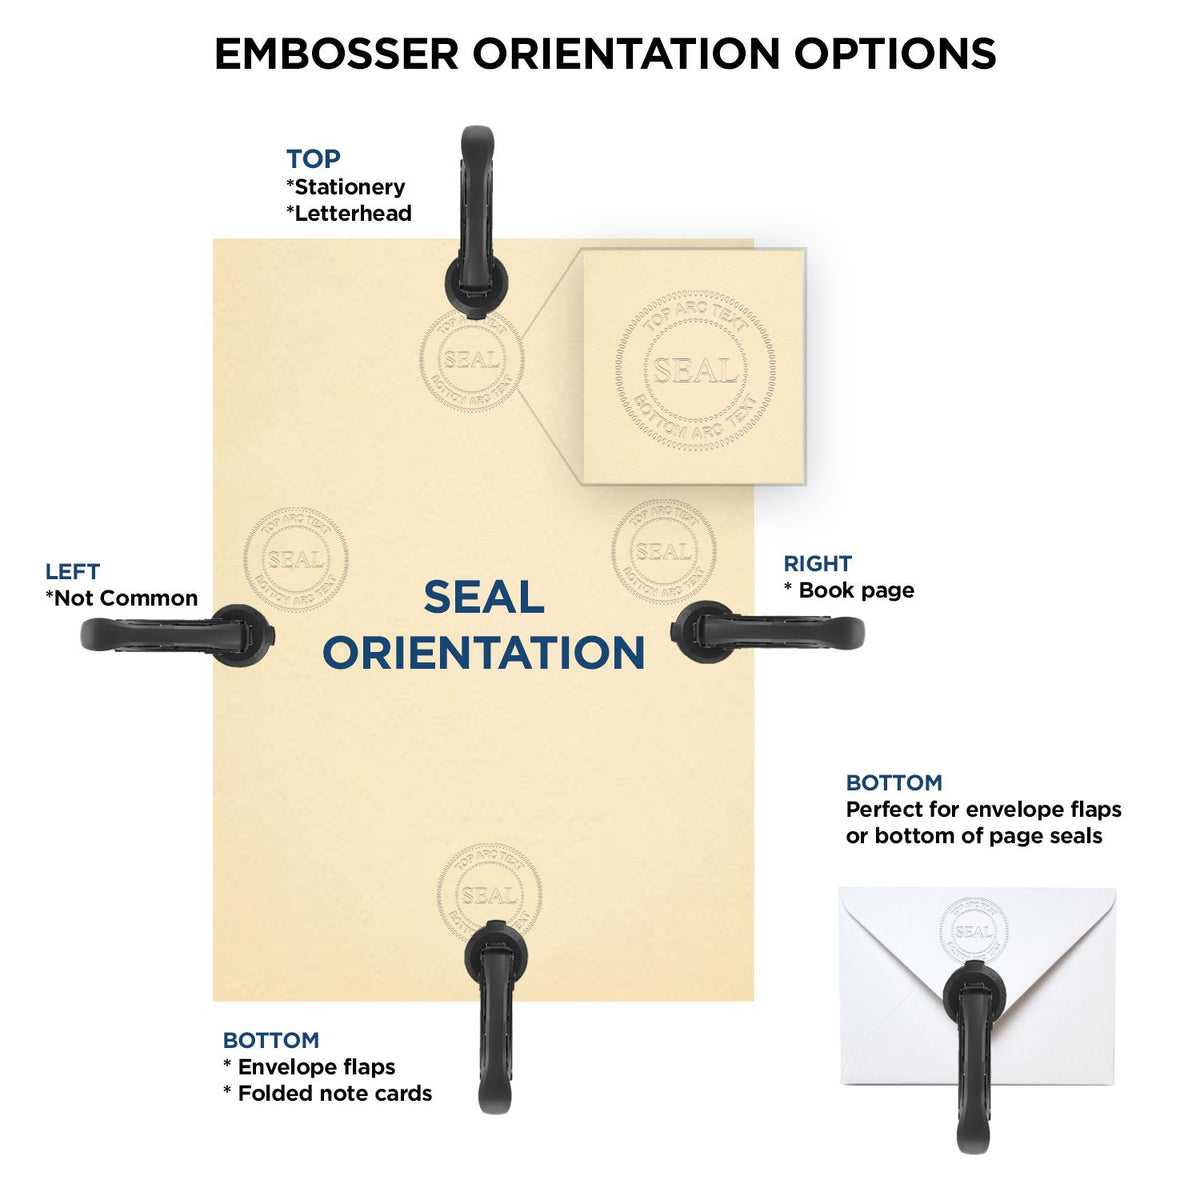 An infographic for the Heavy Duty Cast Iron Connecticut Architect Embosser showing embosser orientation, this is showing examples of a top, bottom, right and left insert.